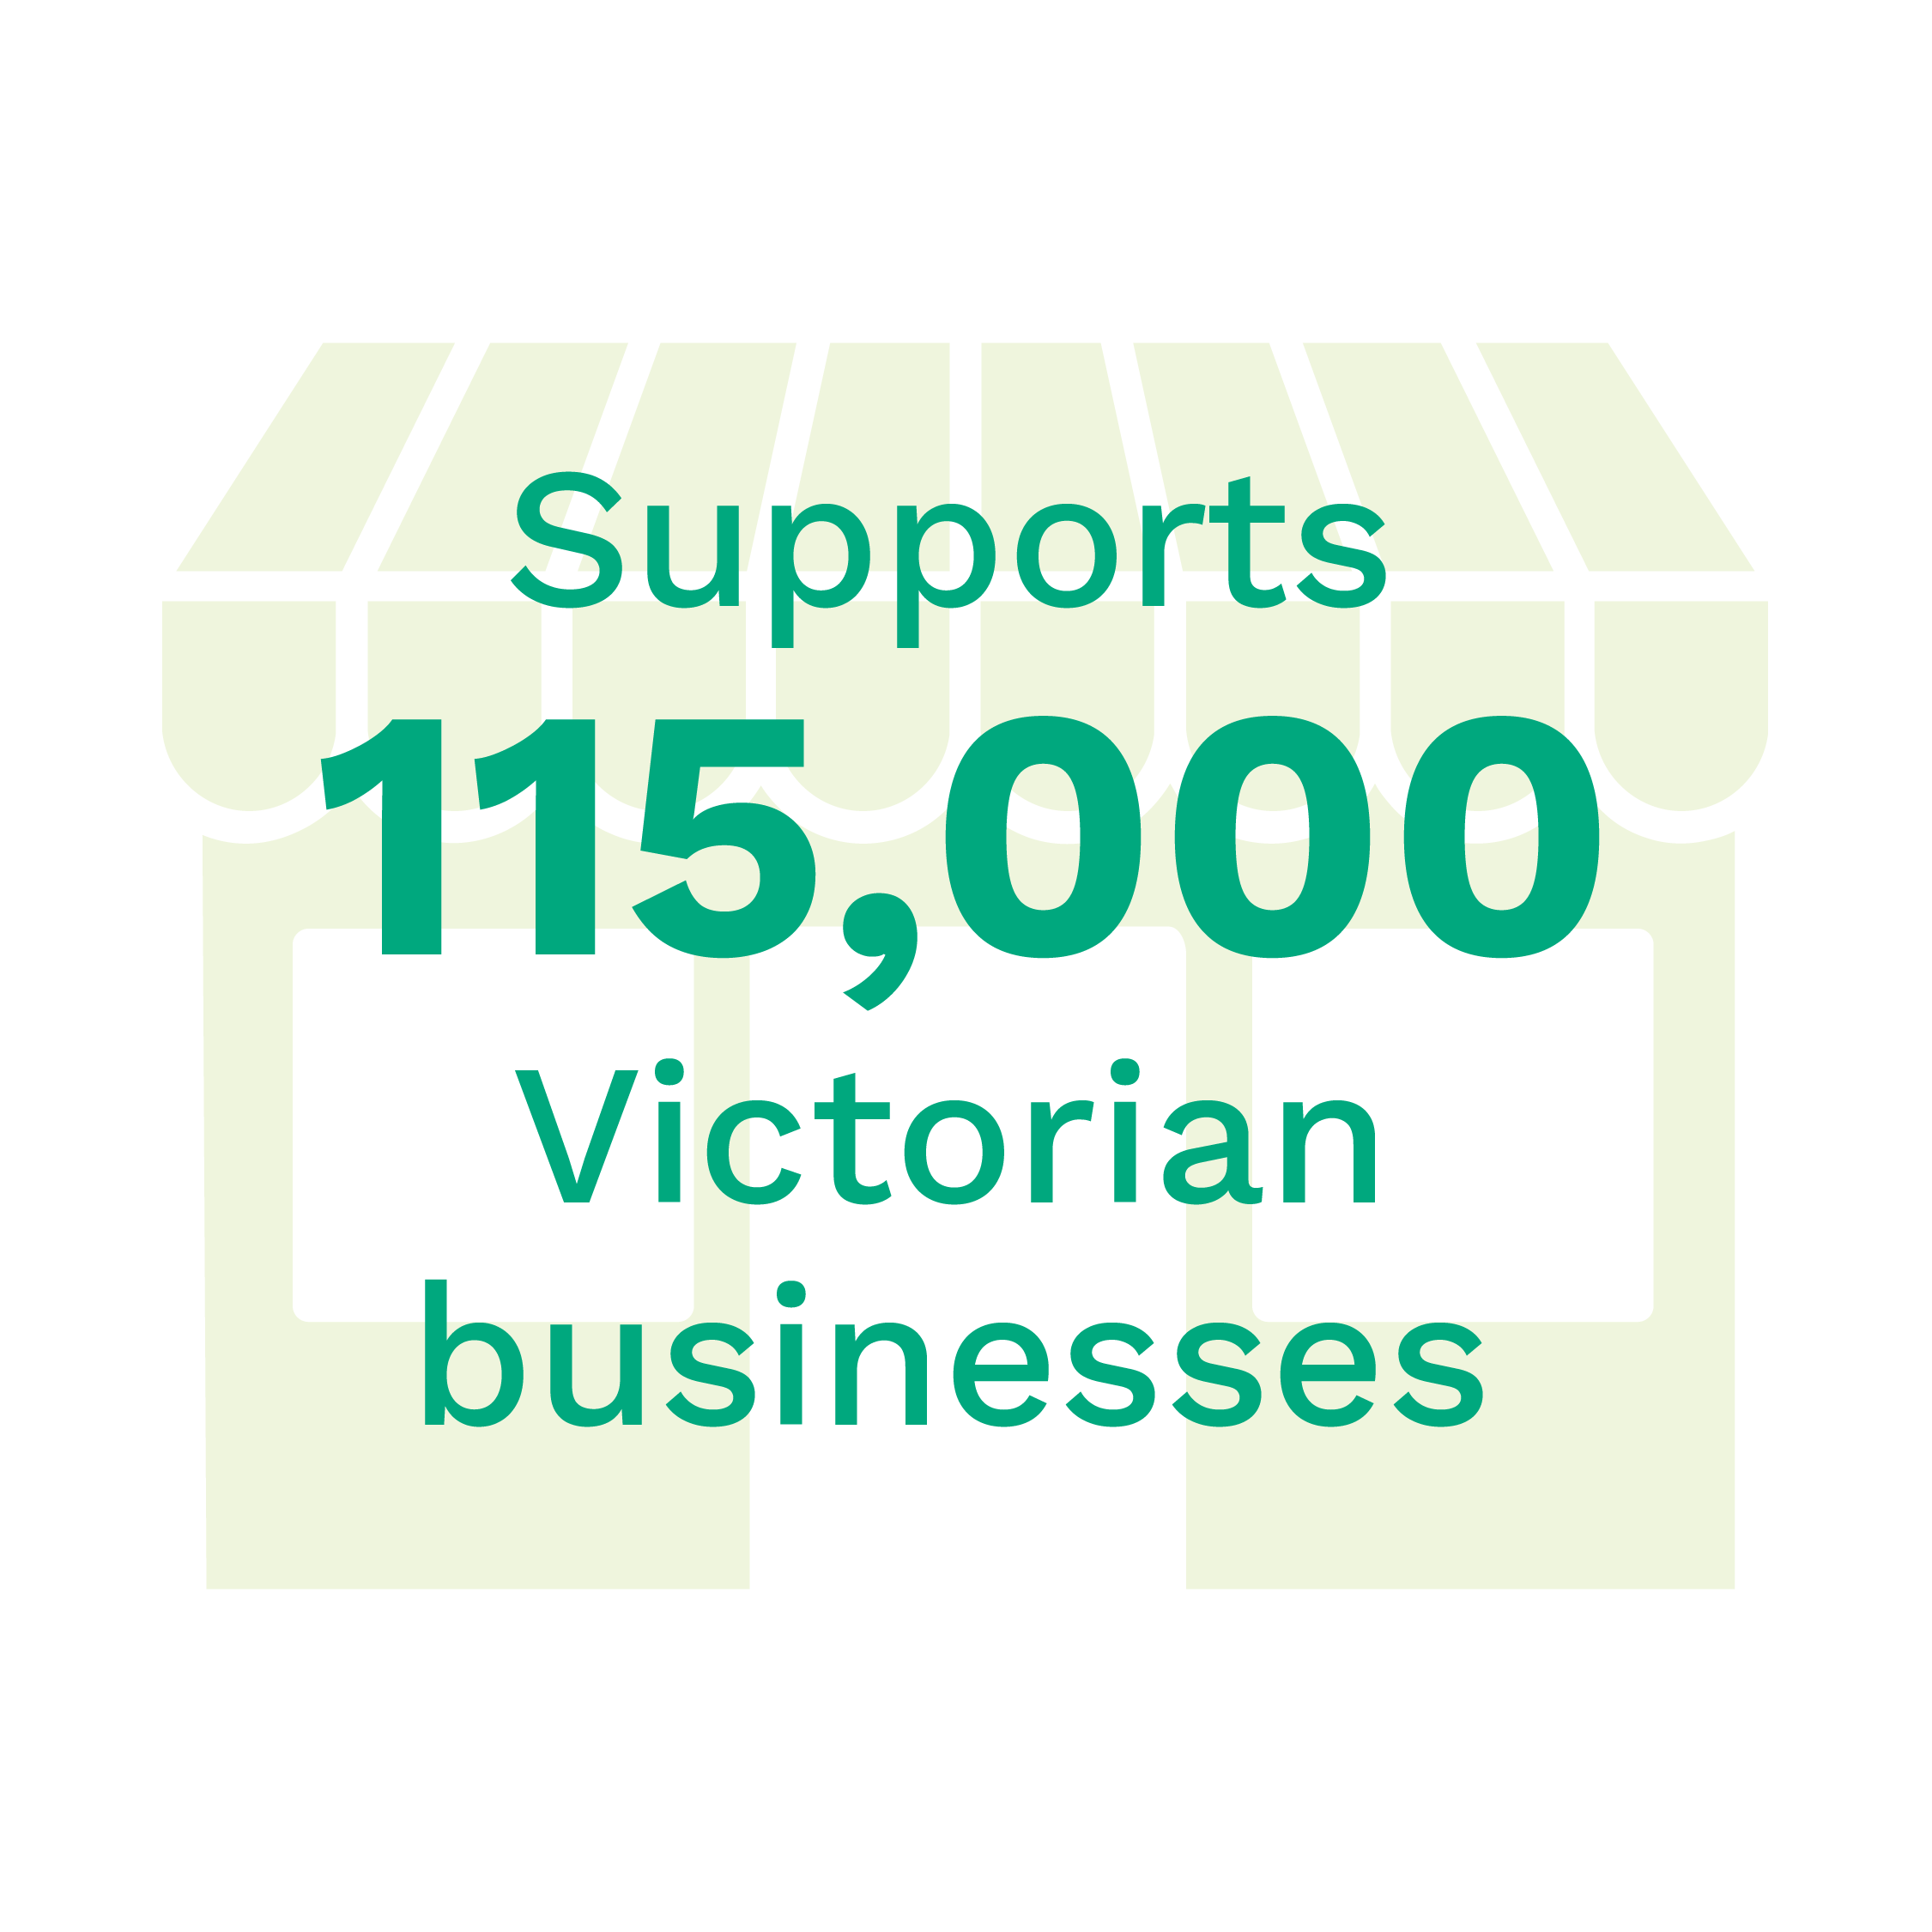 Key statistic victorian businesses